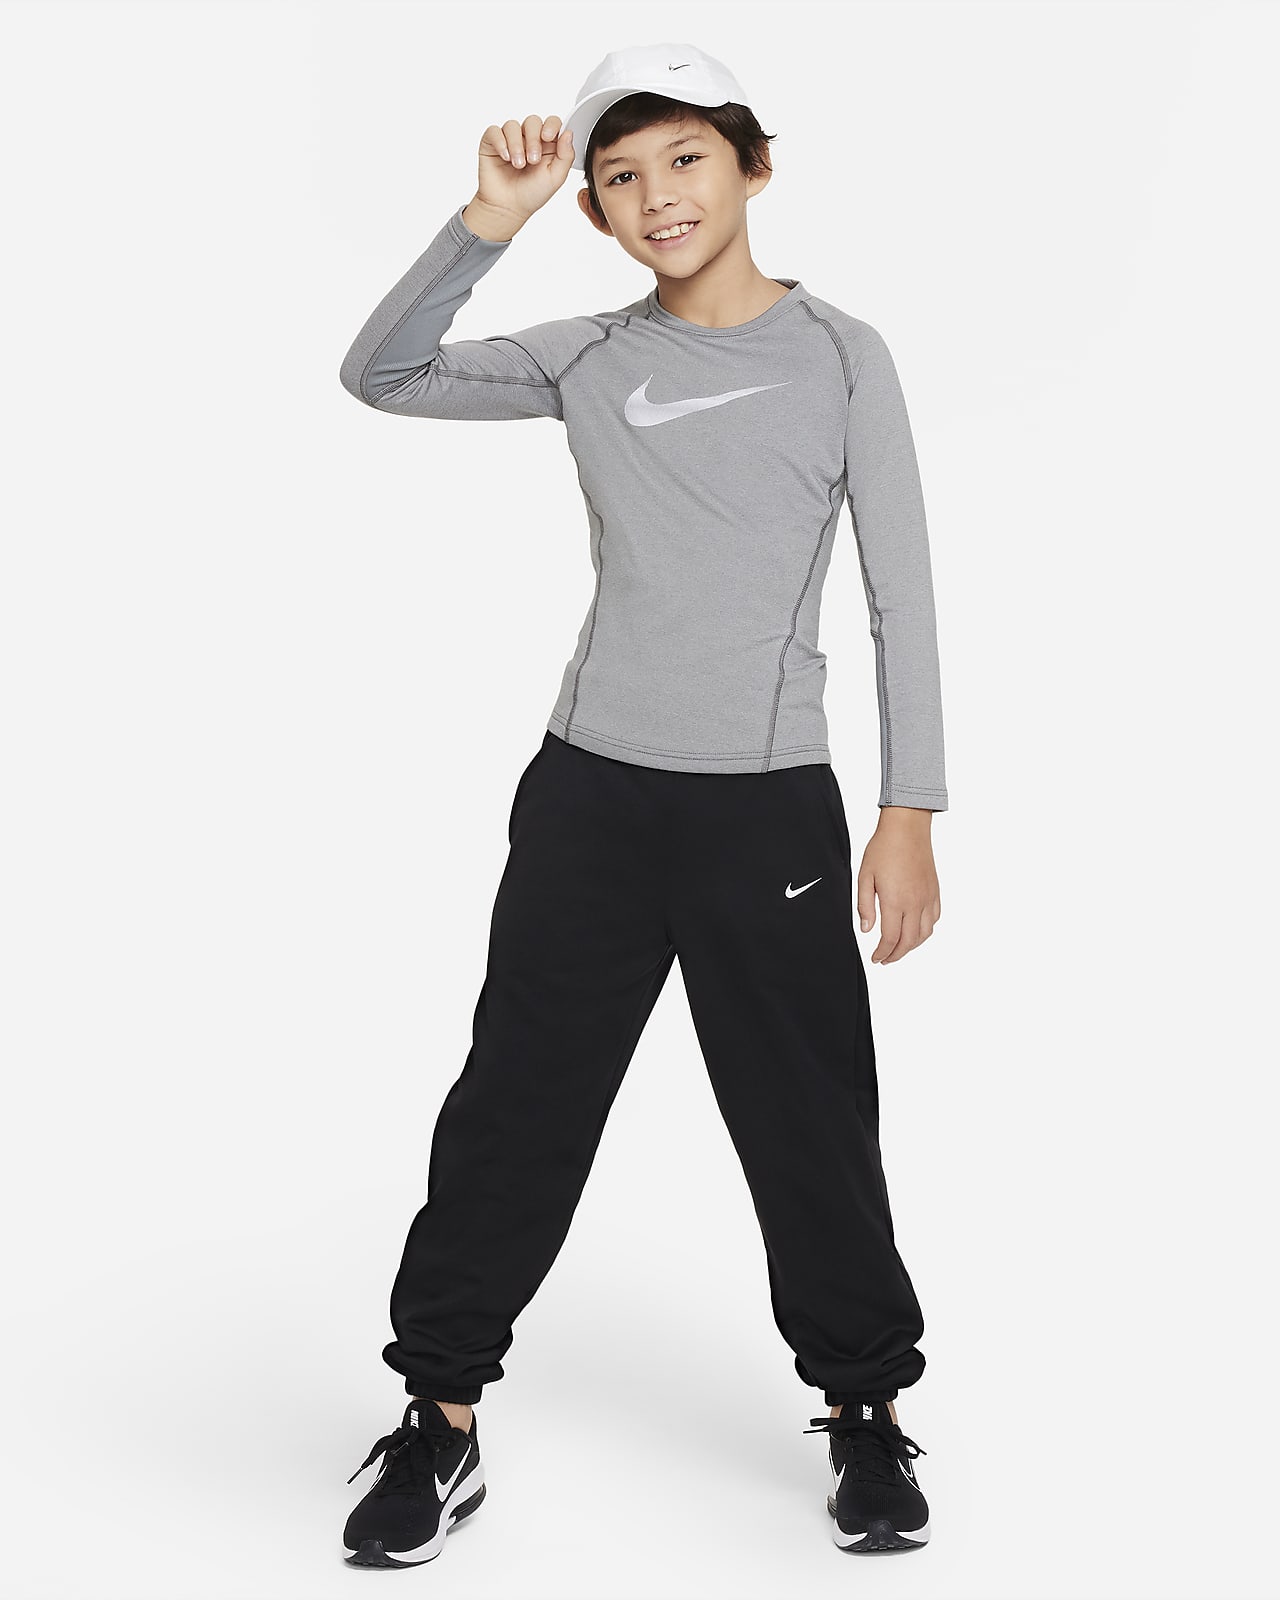 The Best Nike Leggings for Cold Weather. Nike ZA